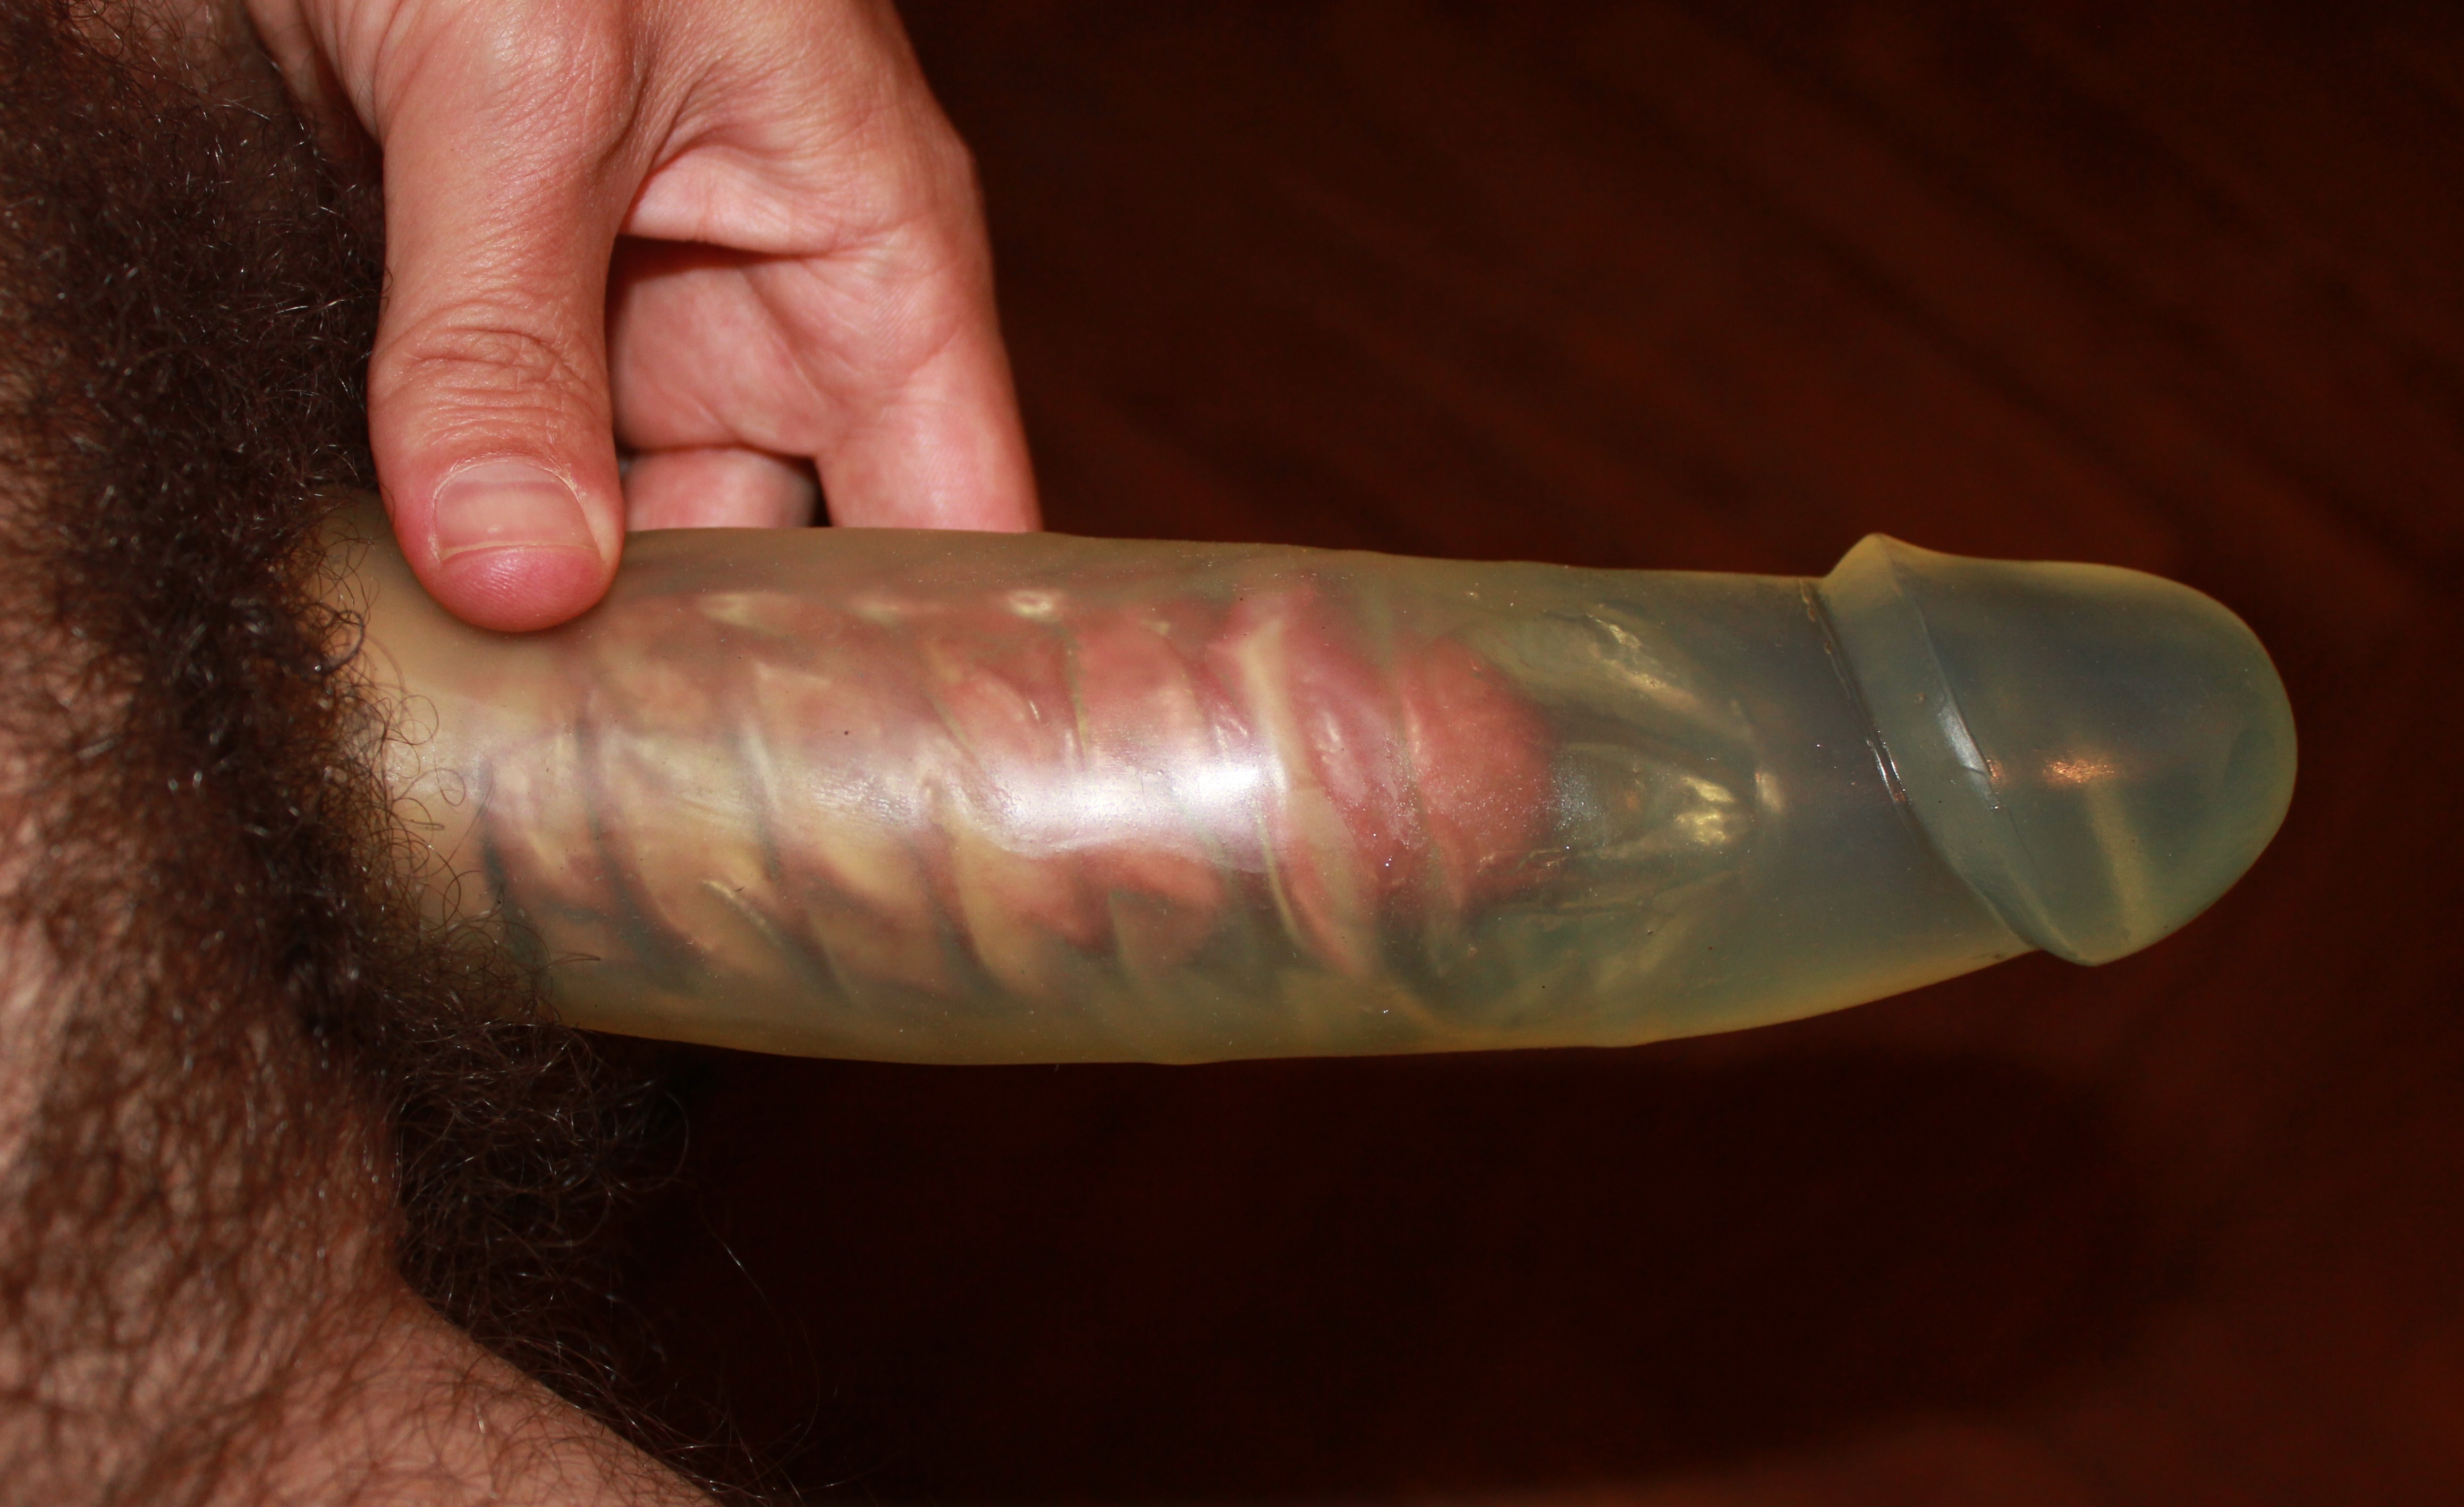 homemade penis extension transexual you porn pic, download homemade penis e...